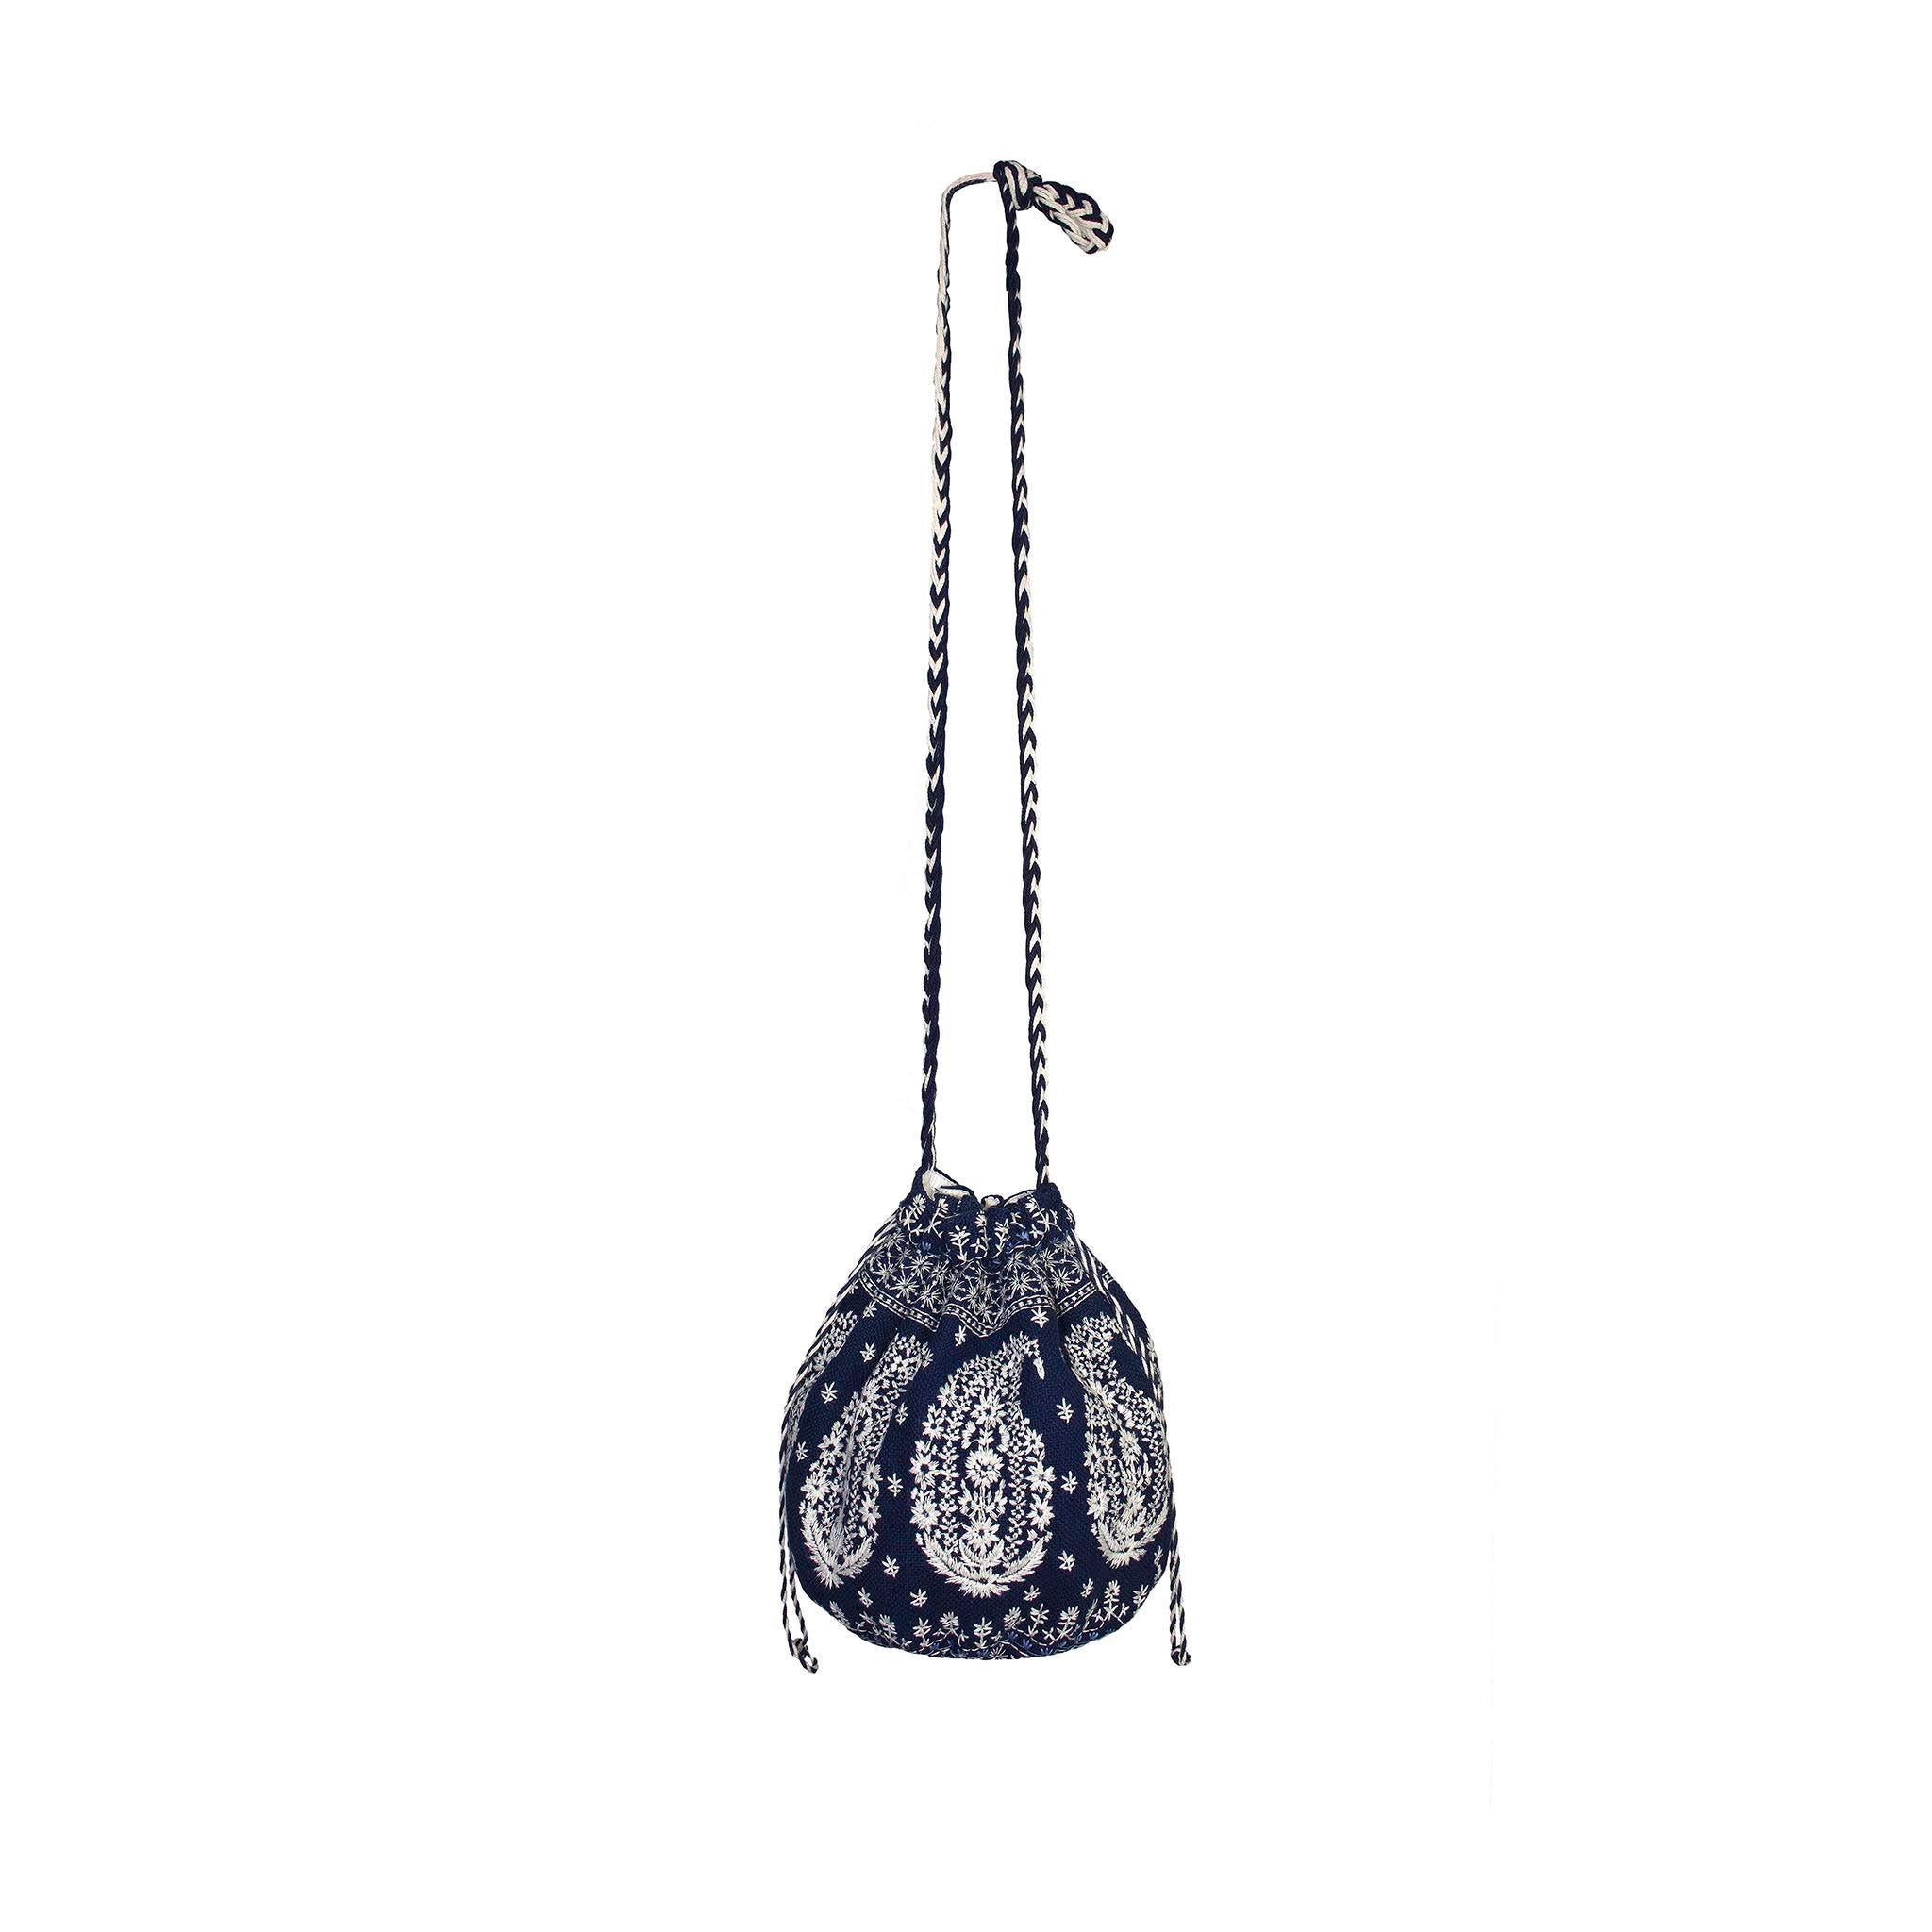 Product details: Joie - Embroidered Bucket Bag - Drawstring Closure - Plaited Strap Detail
Label: Joie
Fabric Content: Off White Embroidered Cotton Floral Top Stitching - Navy Textured Cotton / Main Bag 
Strap Length:
Width: 22”
Depth: